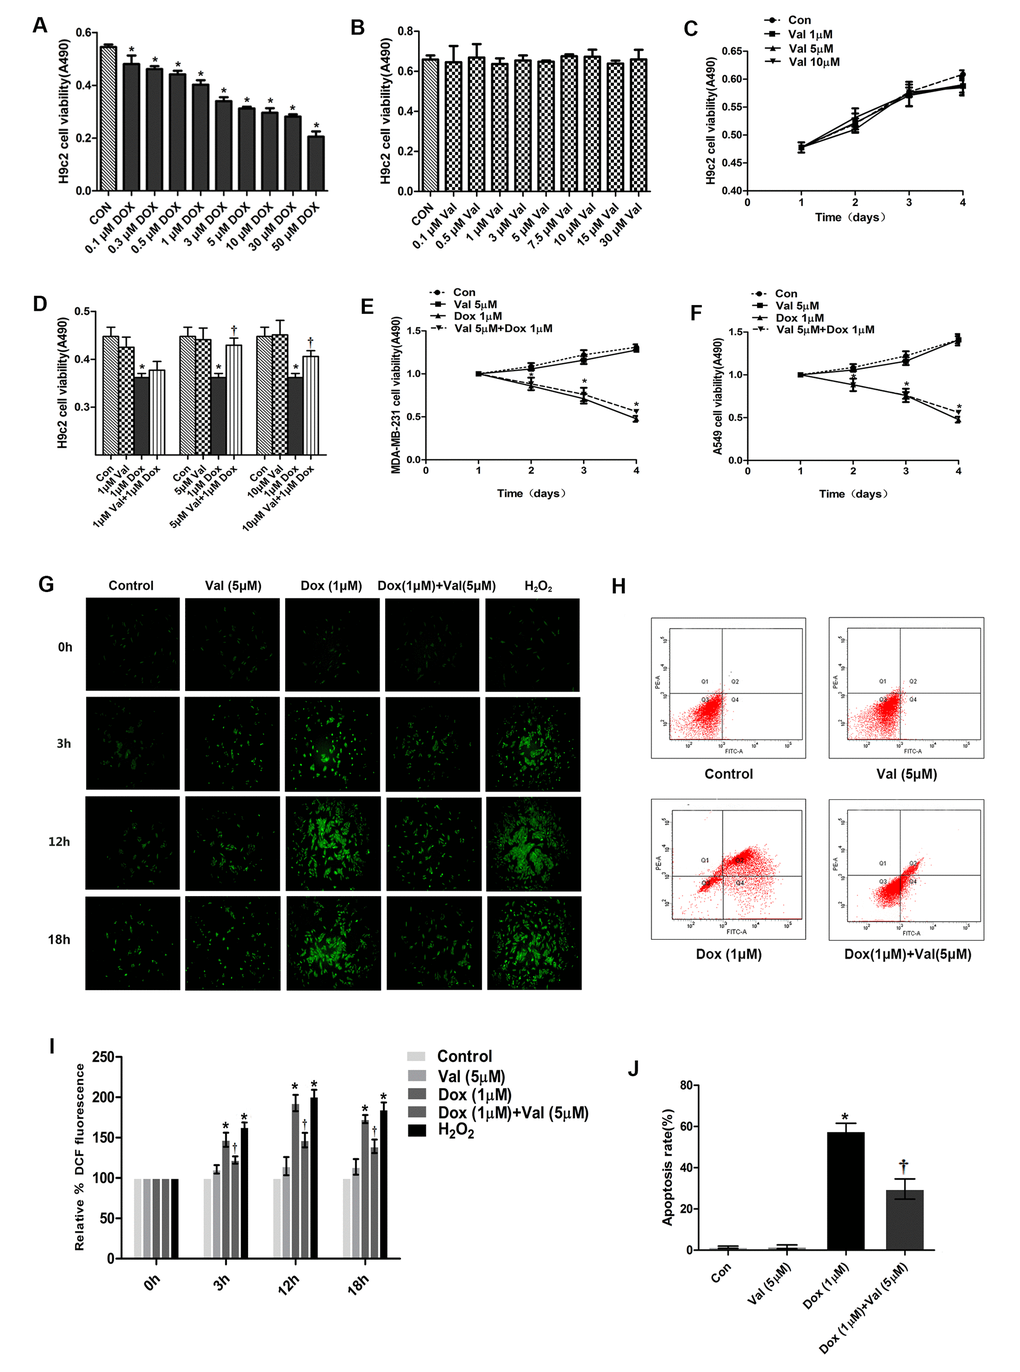 The cell viability determination and effect of Val pre-treatment followed by DOX-exposure on ROS level and apoptosis rate in H9c2 cells. (A) Effect of DOX on H9c2 cells viability for 24 h. (B) Effect of Val on H9c2 cells viability for 24 h. (C) Effect of Val at three concentrations on H9c2 cells over time. (D) Viability of DOX-induced H9c2 cells followed as three of Val concentrations pre-treatment. (E, F) Effect of Val and DOX on tumor cells viability. (G) Effect of Val pre-treatment on the ROS level of DOX-treated H9c2 cells at different time points. (H) Effect of Val on apoptosis of DOX-treated H9c2 cells. (I) Microscopic analysis of Val and DOX-treatment on ROS levels by DCF Fluorescence. (J) The bar graph of the quantitative analysis of apoptosis rate of H9c2 cells. *P